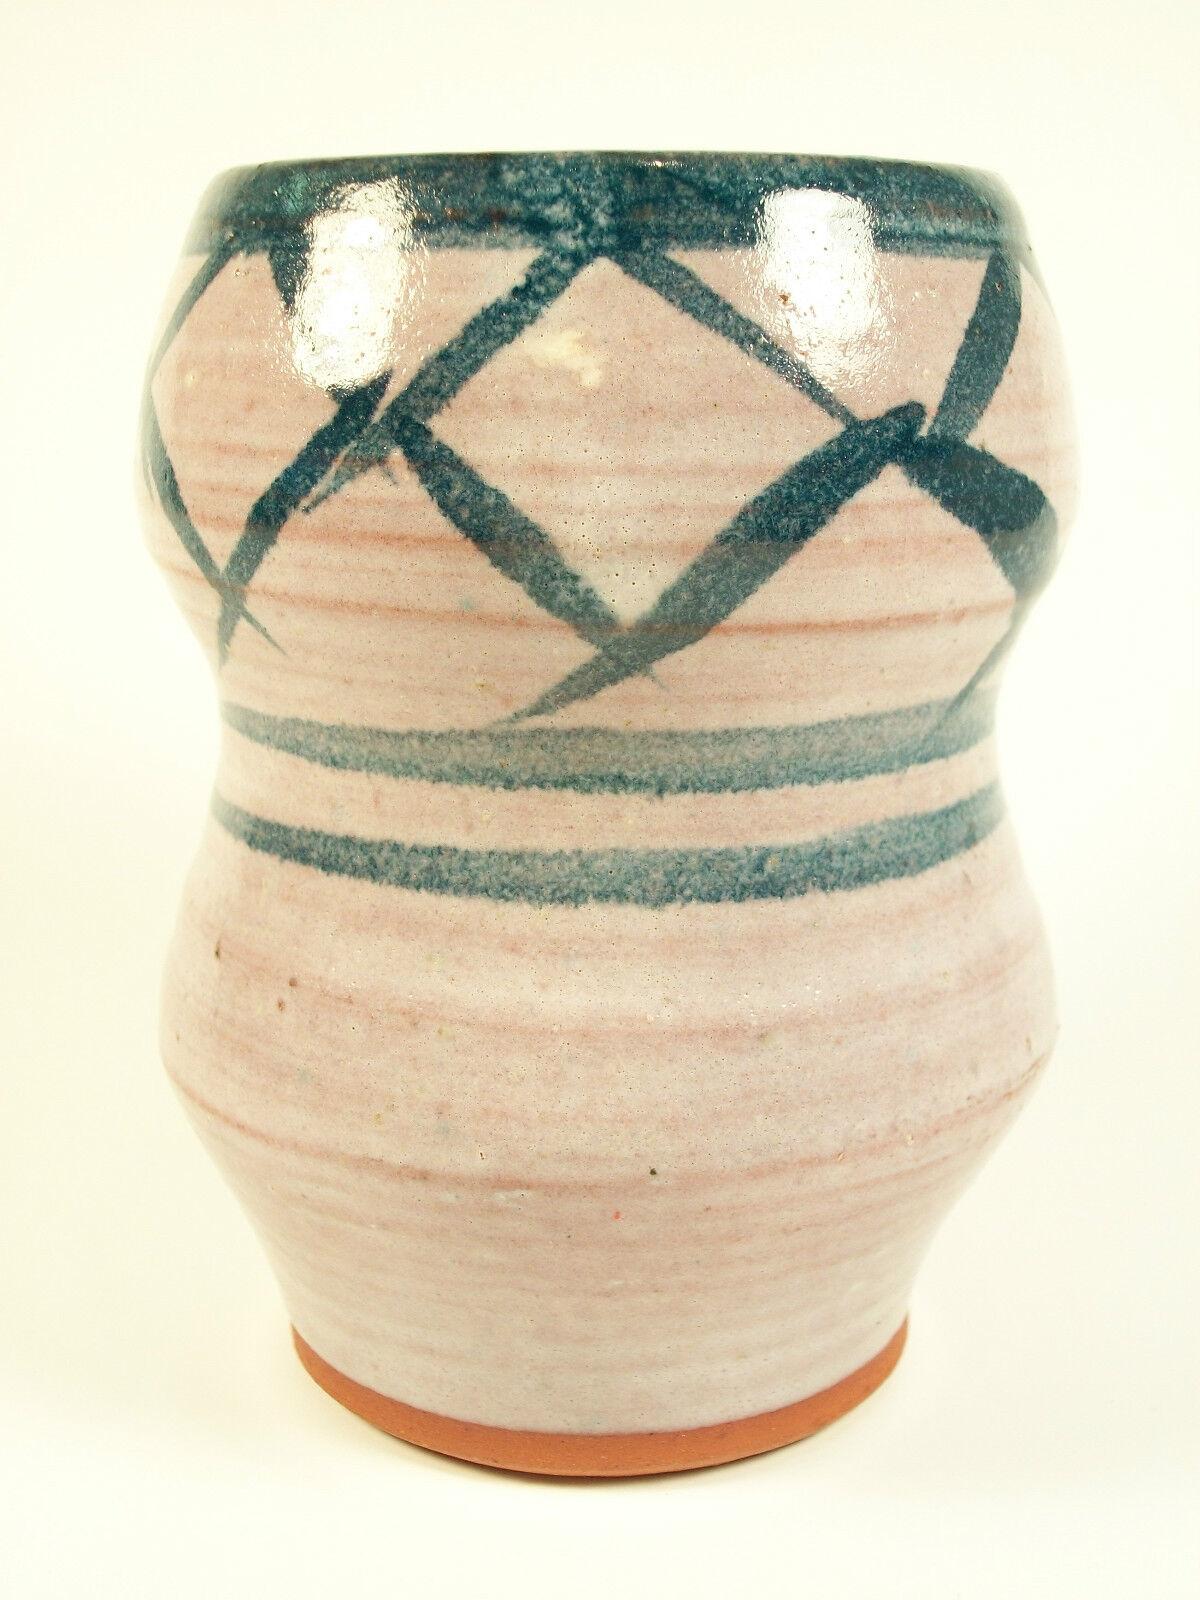 JANE SACHS - Mid Century wheel thrown and hand painted terracotta studio pottery vase - signed and dated on the base - circa 1978.

Excellent vintage condition - no loss - no damage - no restoration - body and glaze imperfections as intended by the